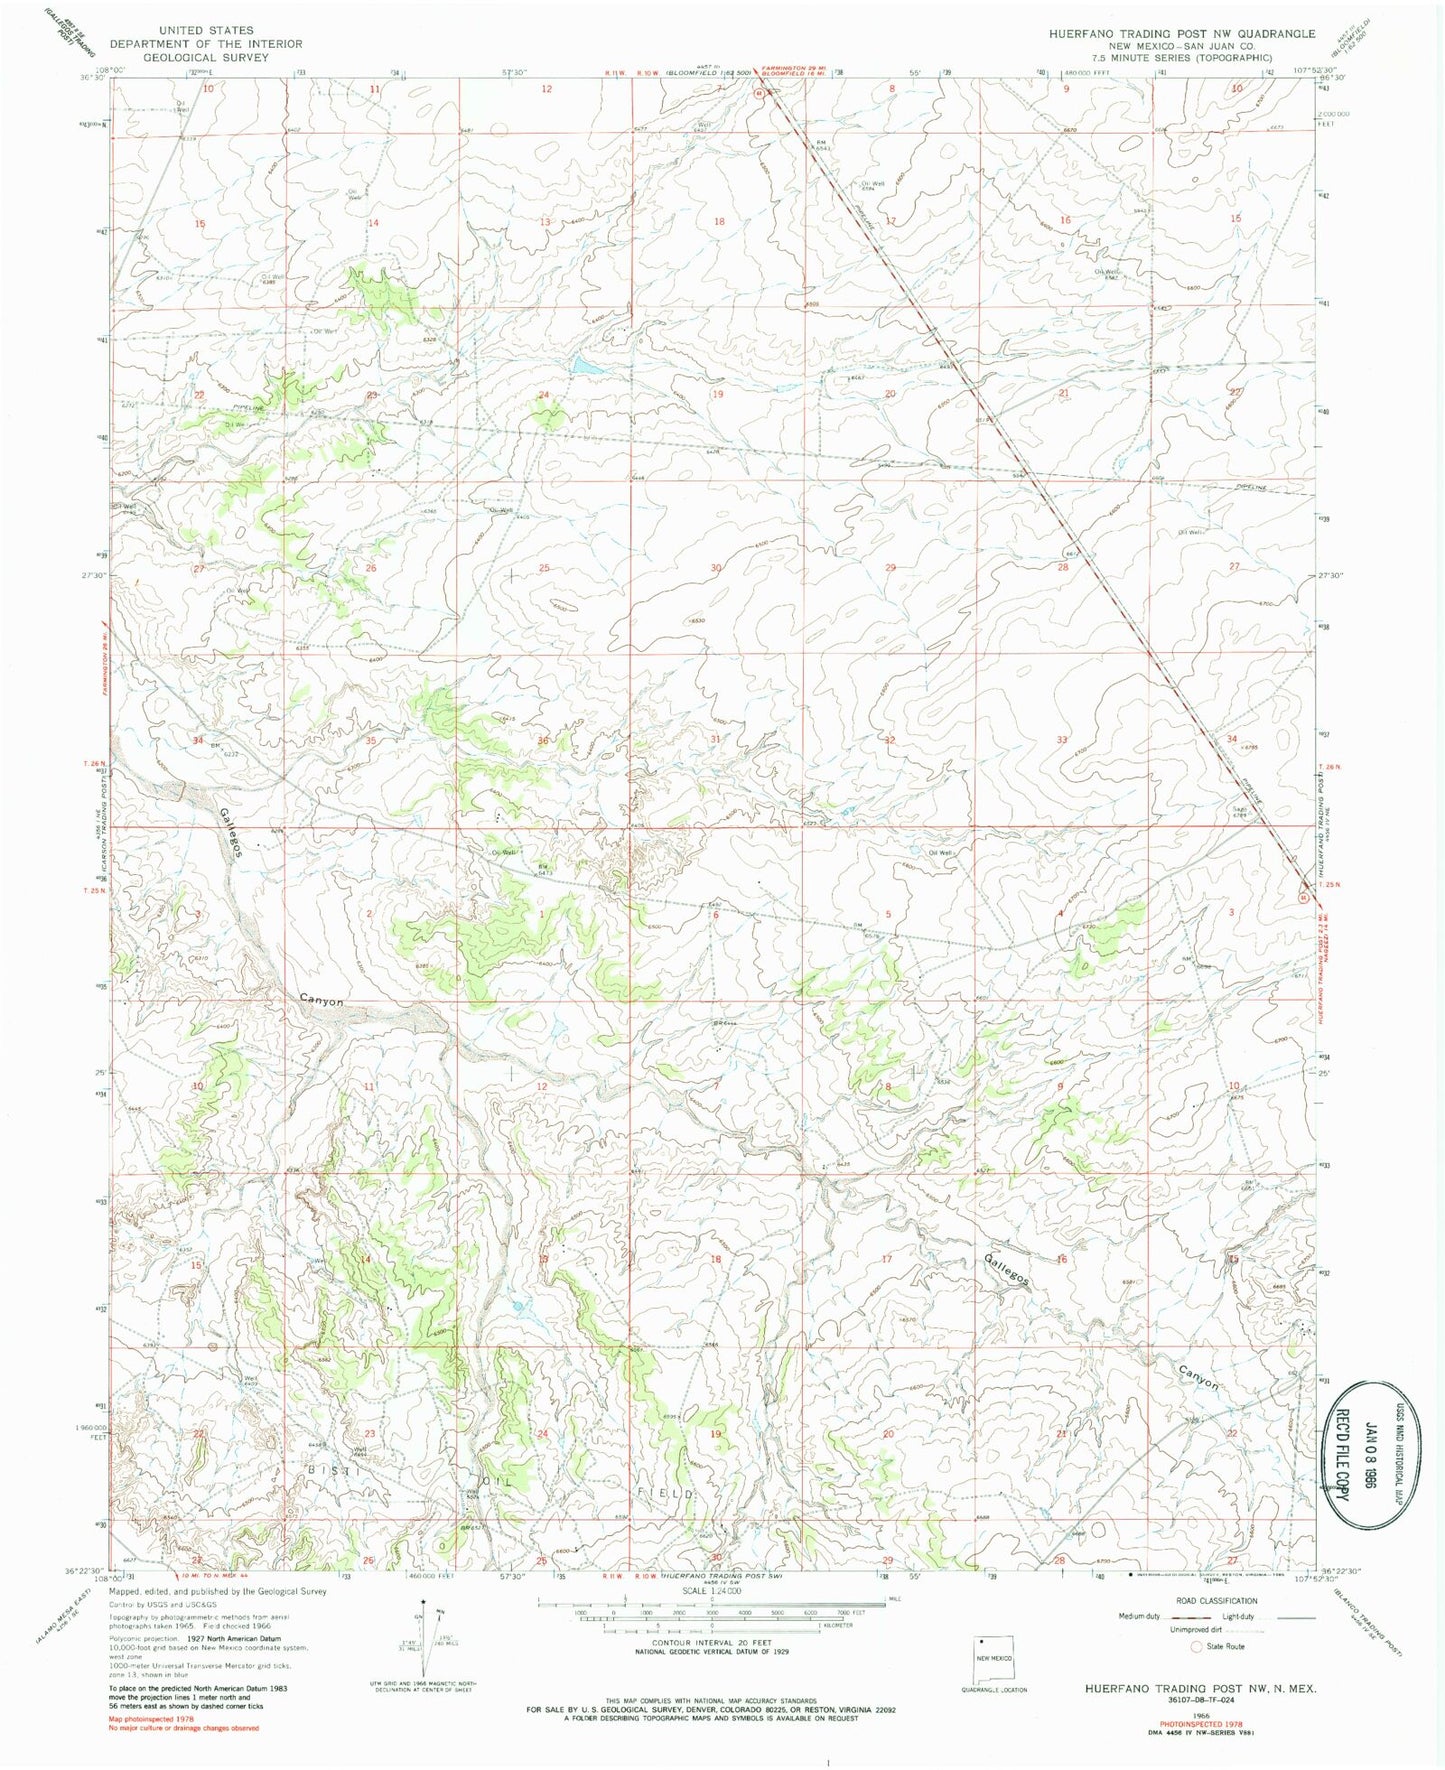 Classic USGS Huerfano Trading Post NW New Mexico 7.5'x7.5' Topo Map Image